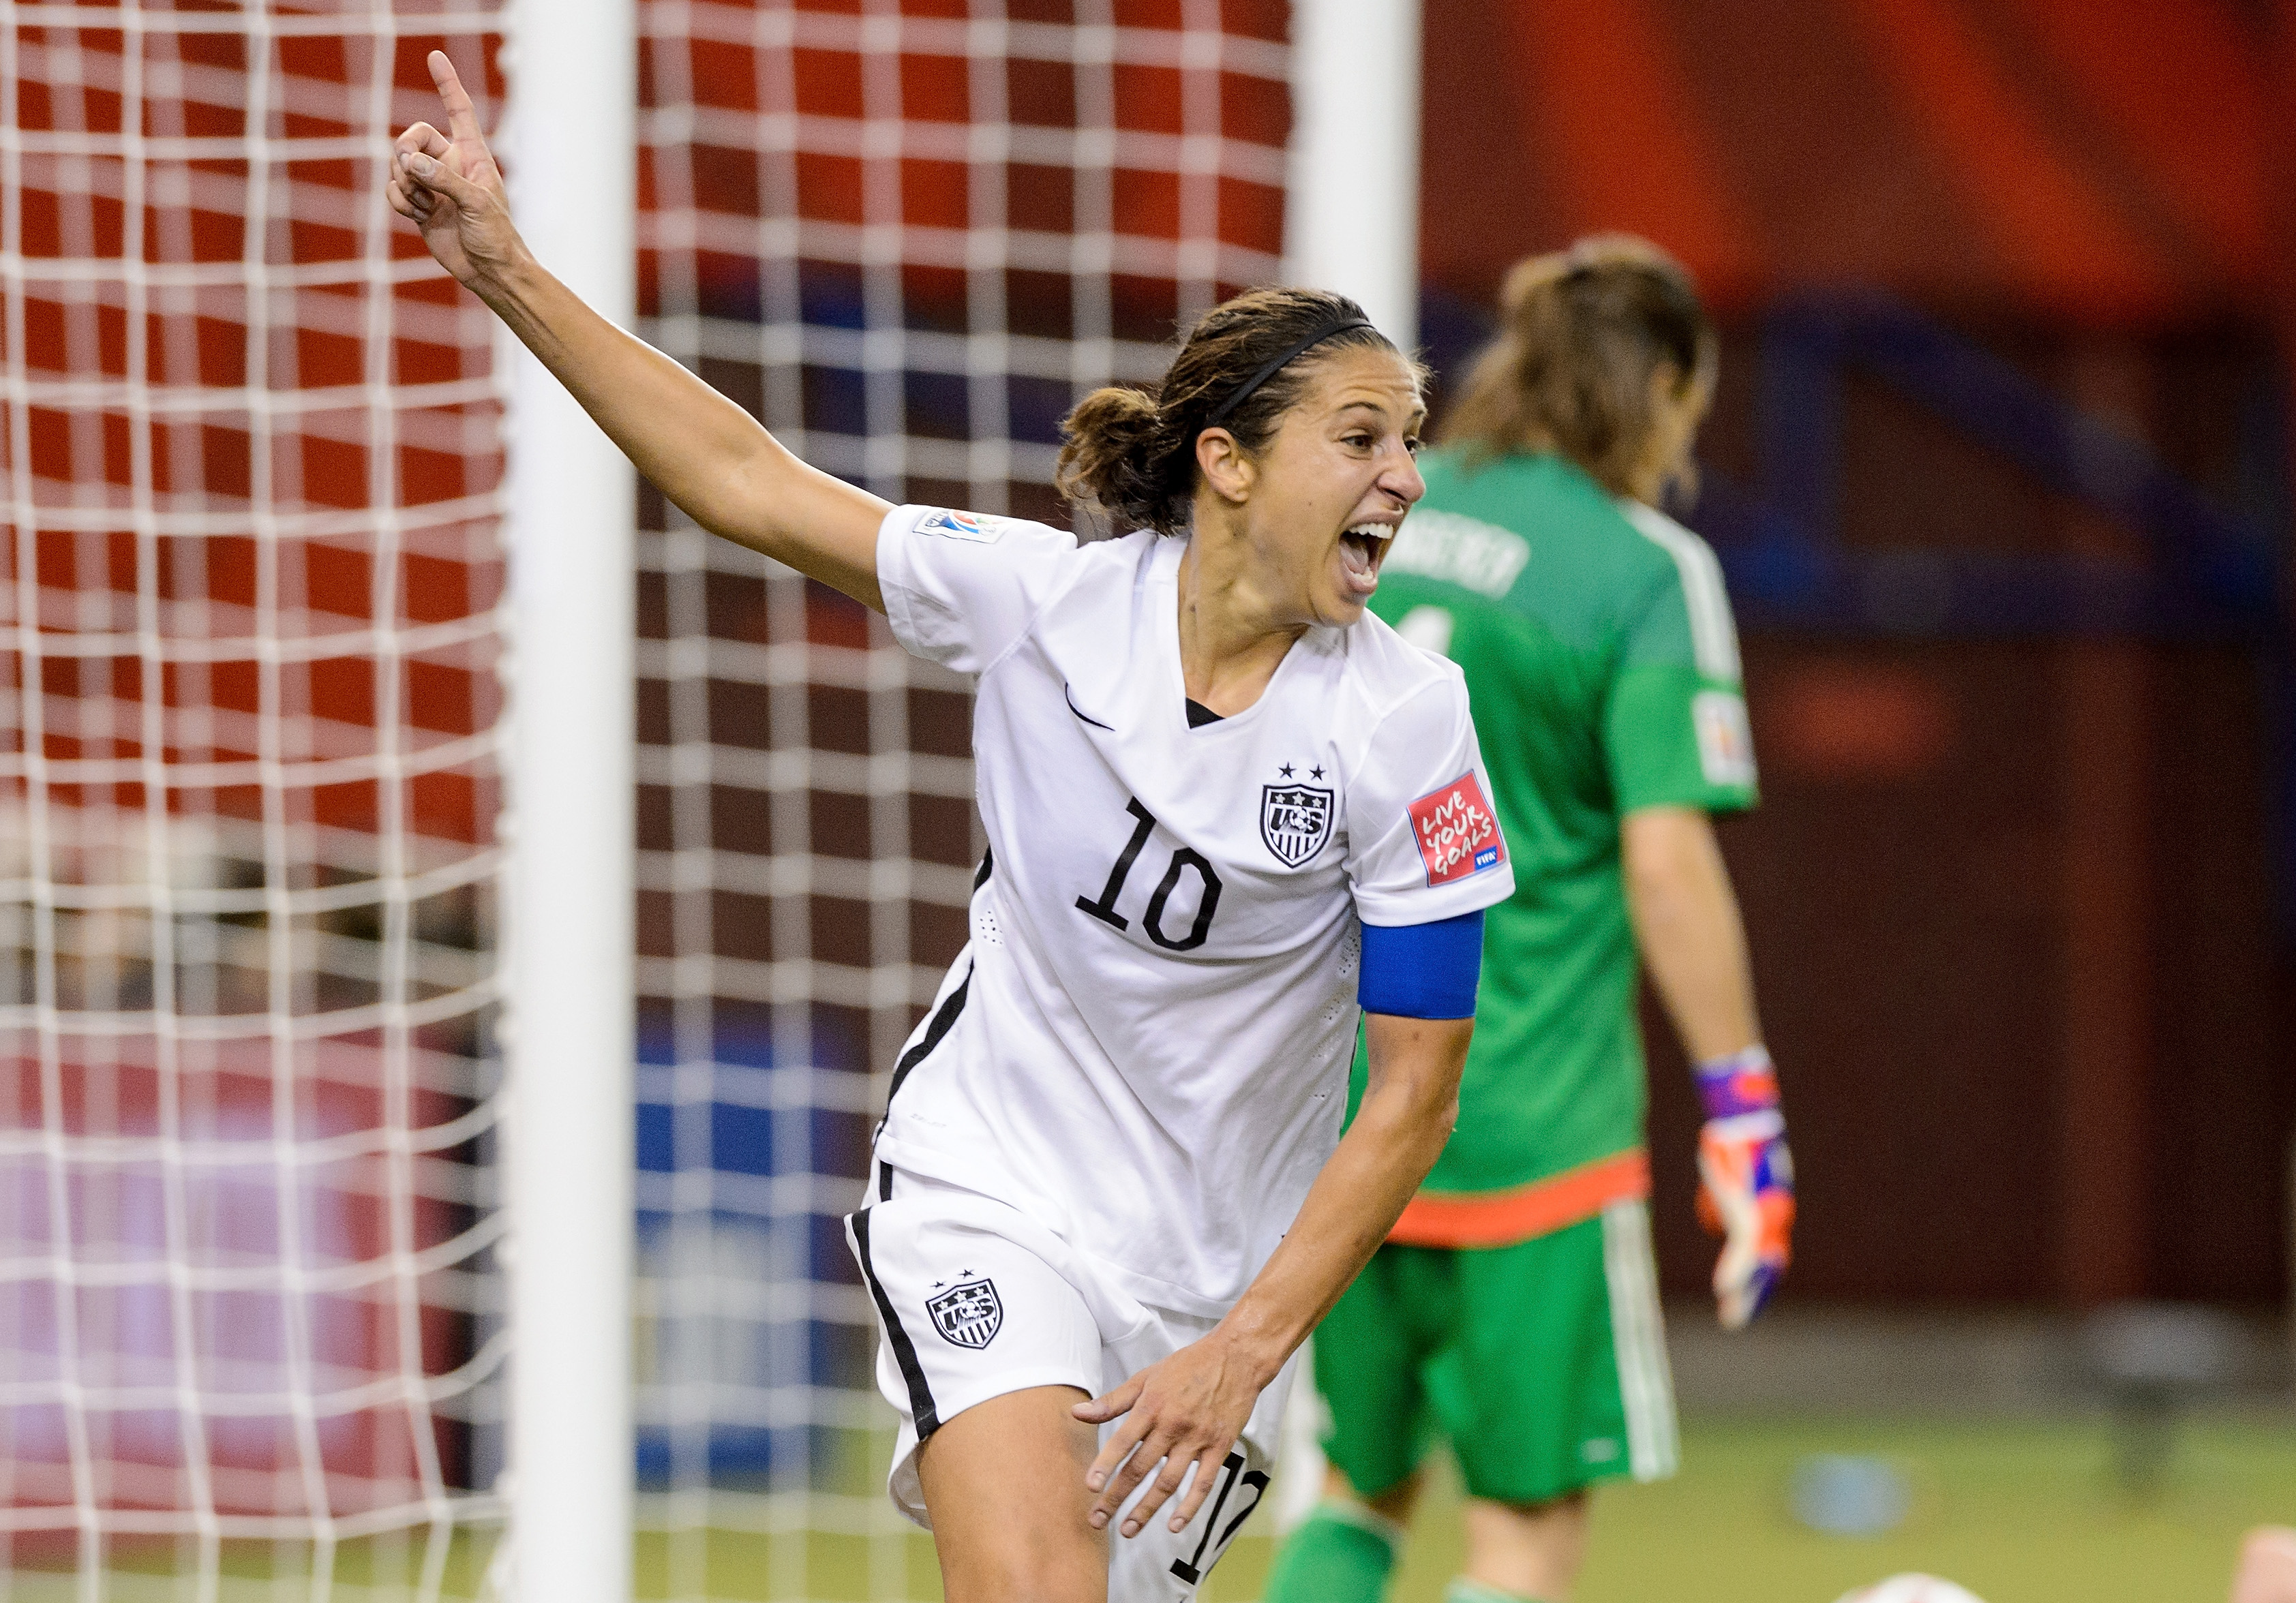 Carli Lloyd celebrates setting up Kelly O'Hara's goal in the FIFA Women's World Cup 2015 Semi-Final Match at Olympic Stadium on June 30, 2015 in Montreal, Canada. (Minas Panagiotakis—Getty Images)